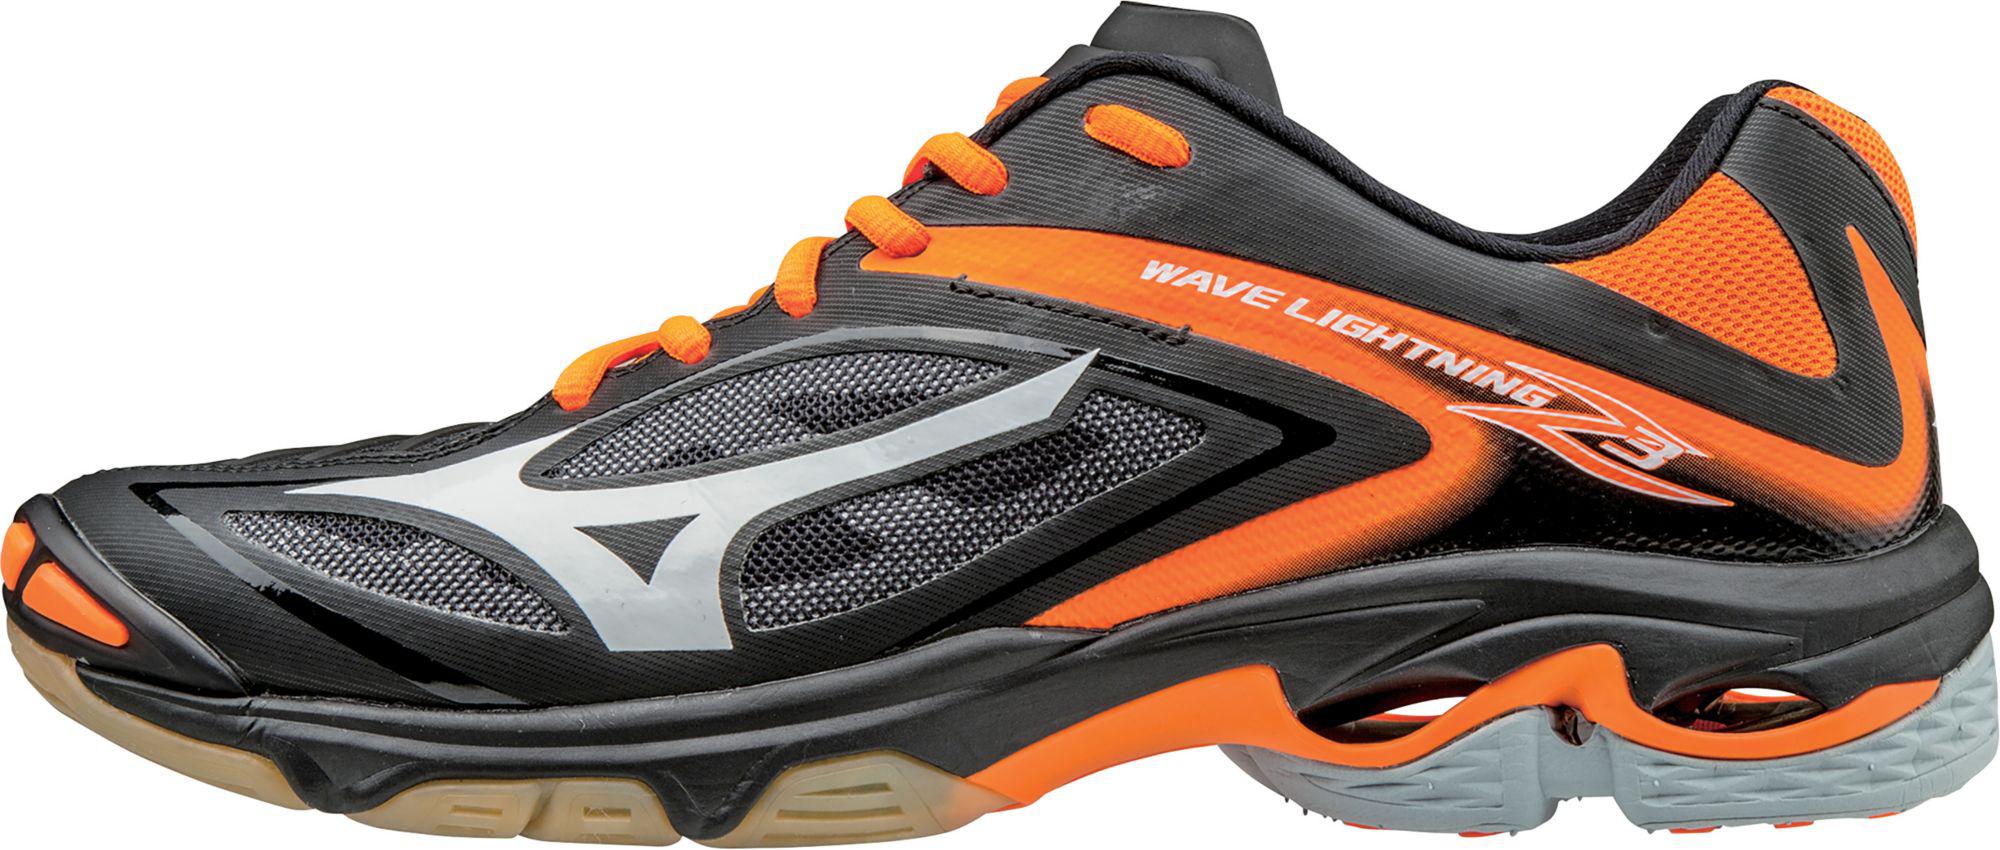 Wave Lightning Z3 Volleyball Shoes 